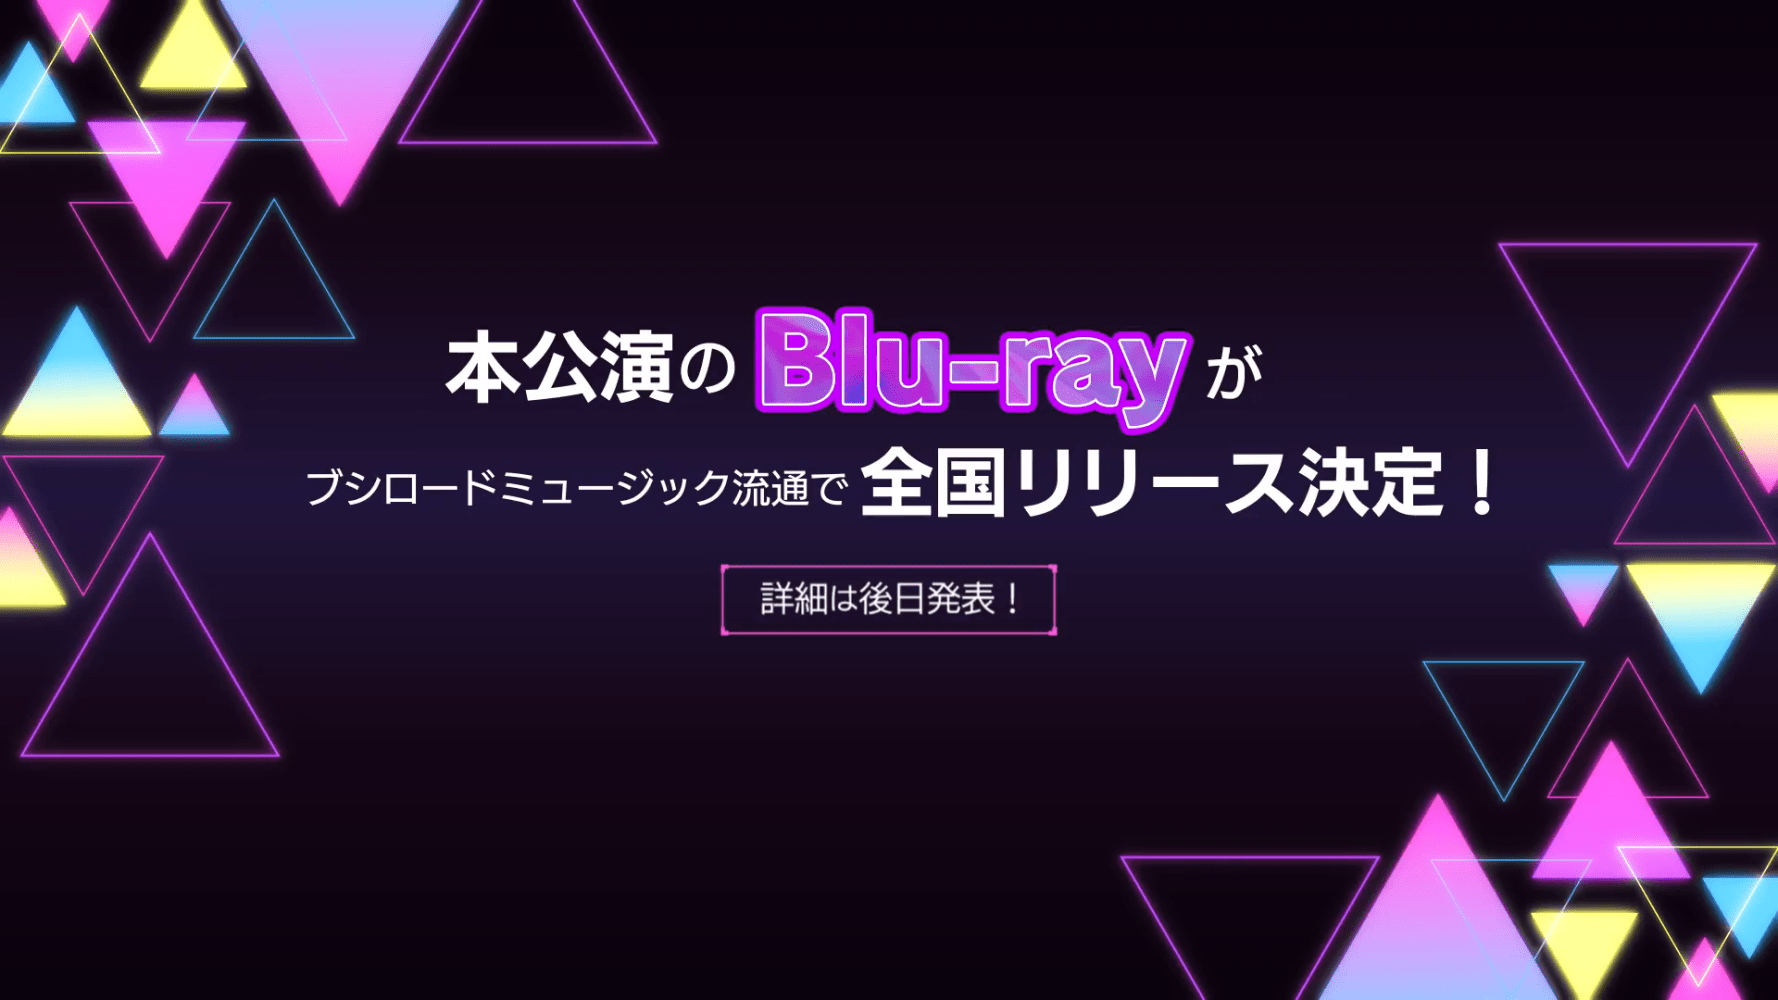 hololive 3rd fes. Link Your Wish』Blu-rayがリリース決定 - VTuber板